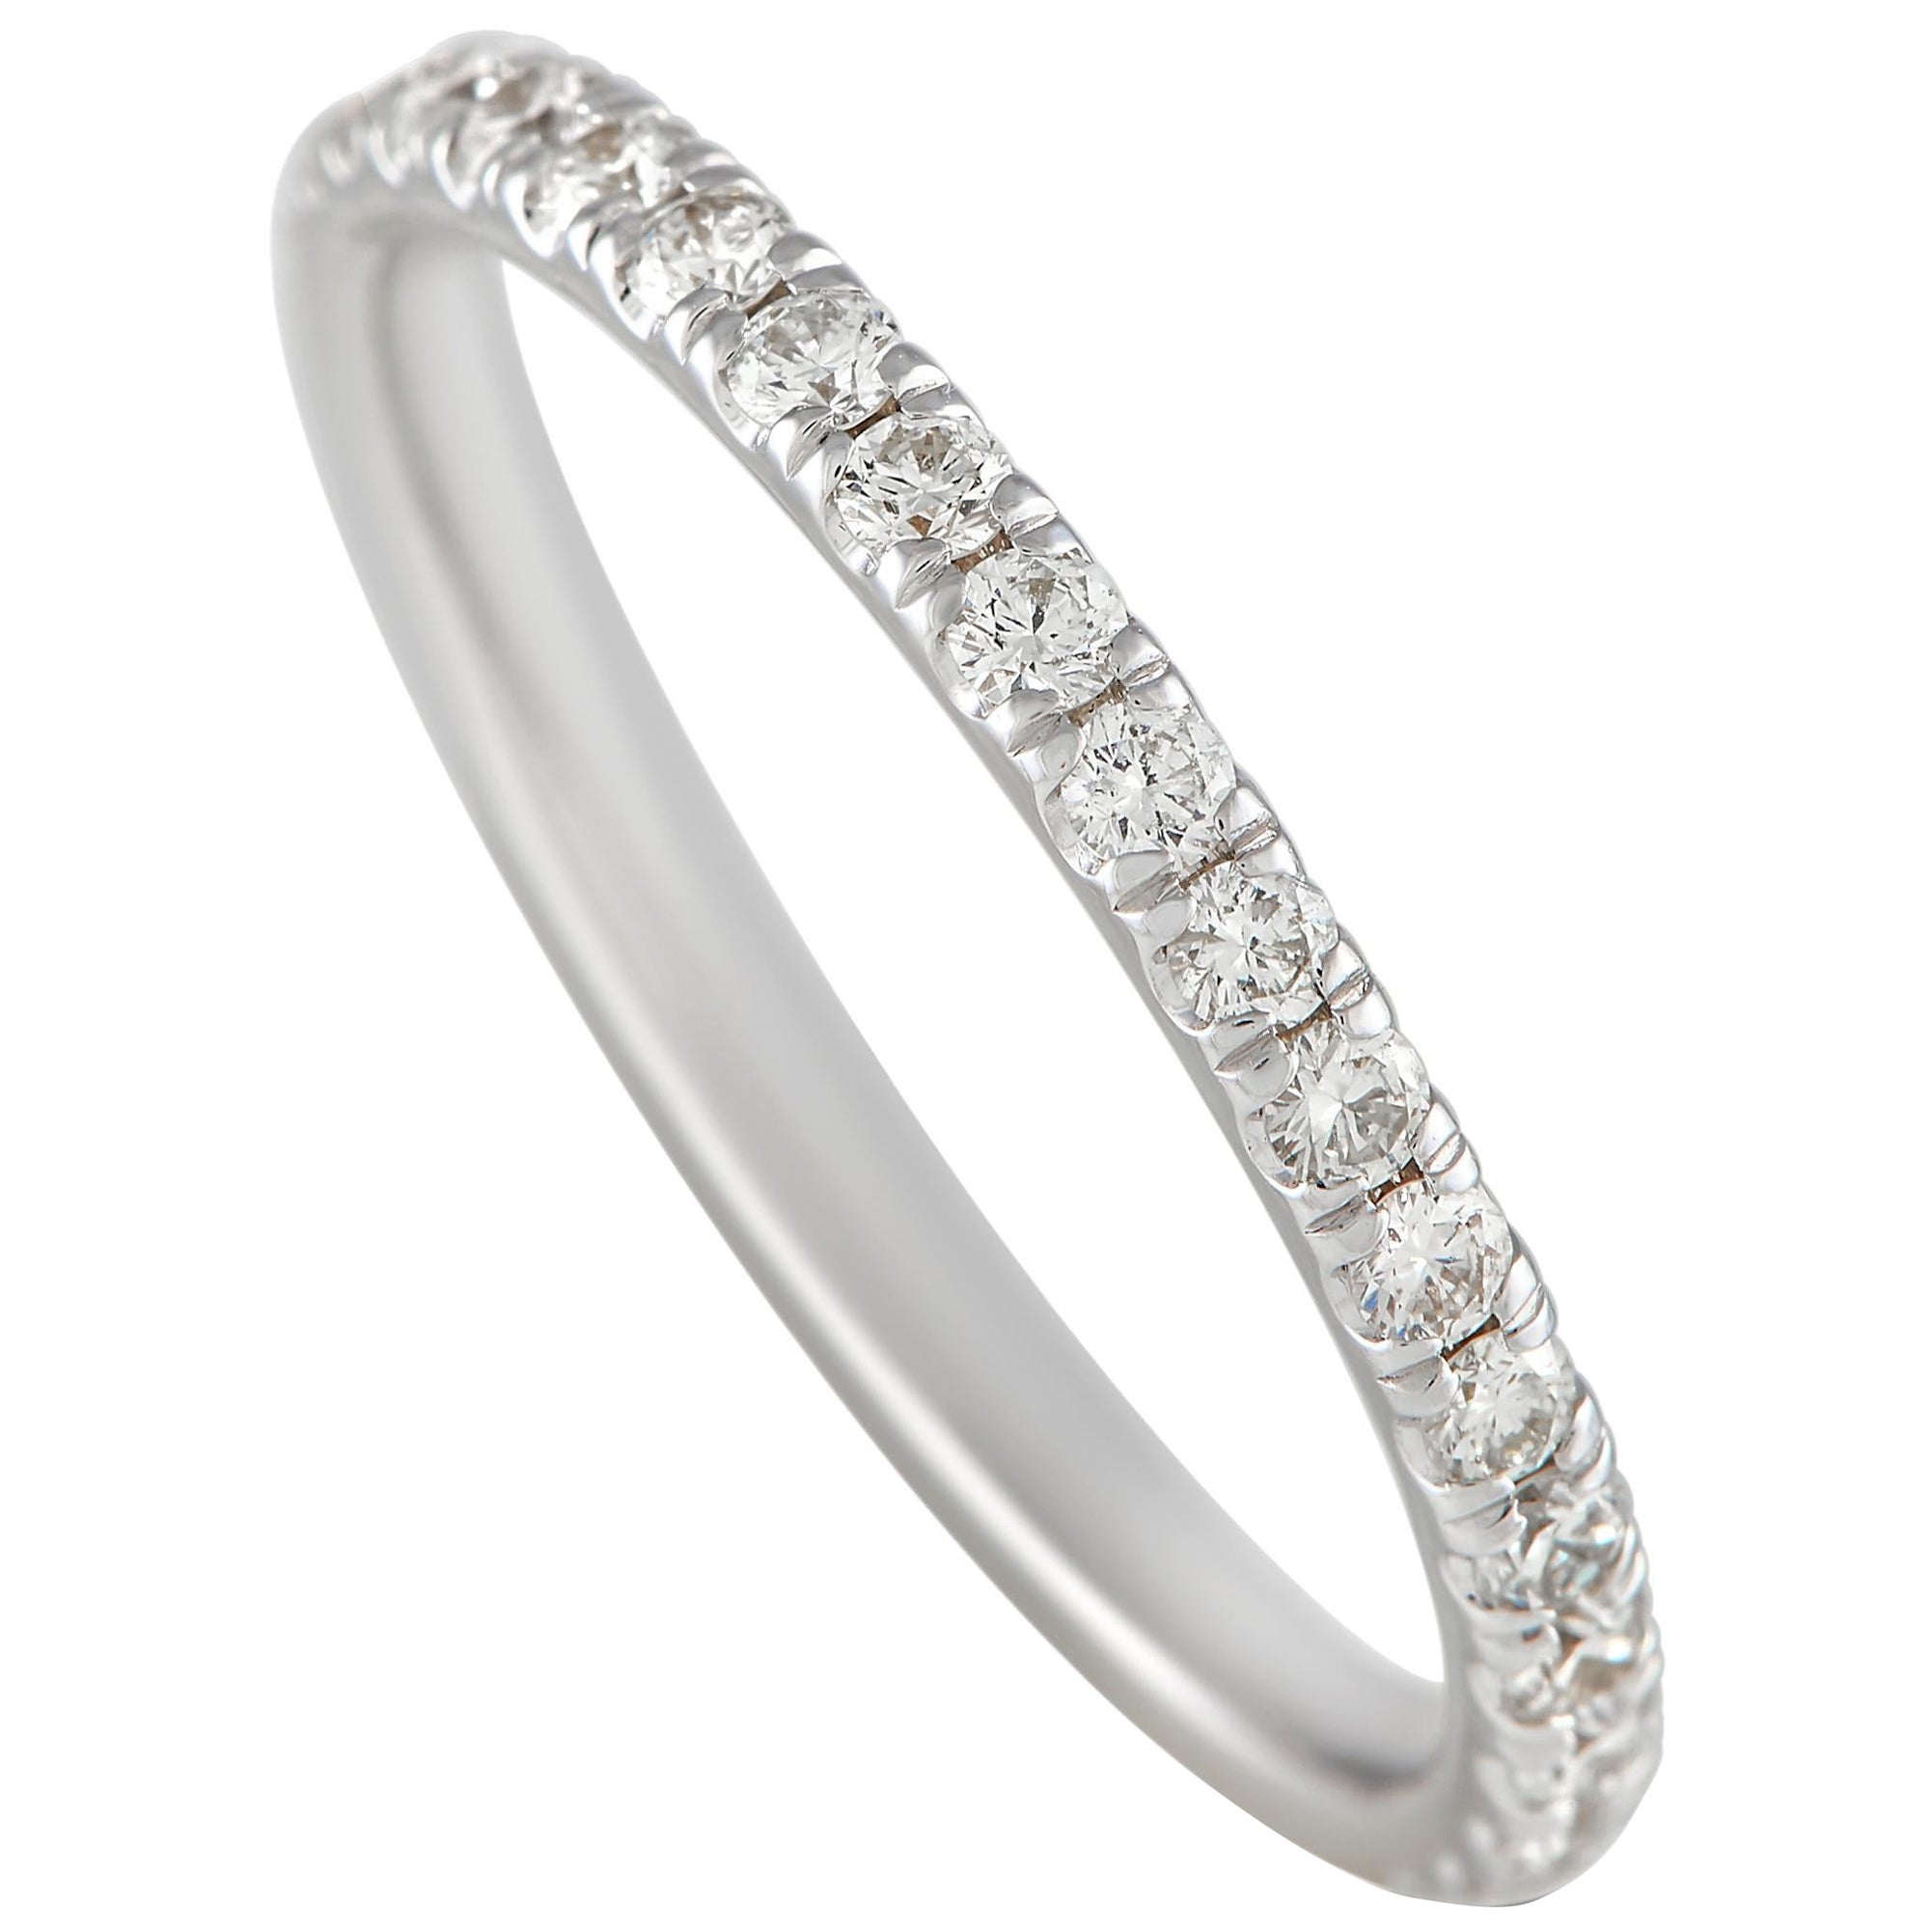 LB Exclusive 14k White Gold 0.63 Carat Diamond Eternity Band Ring For Sale